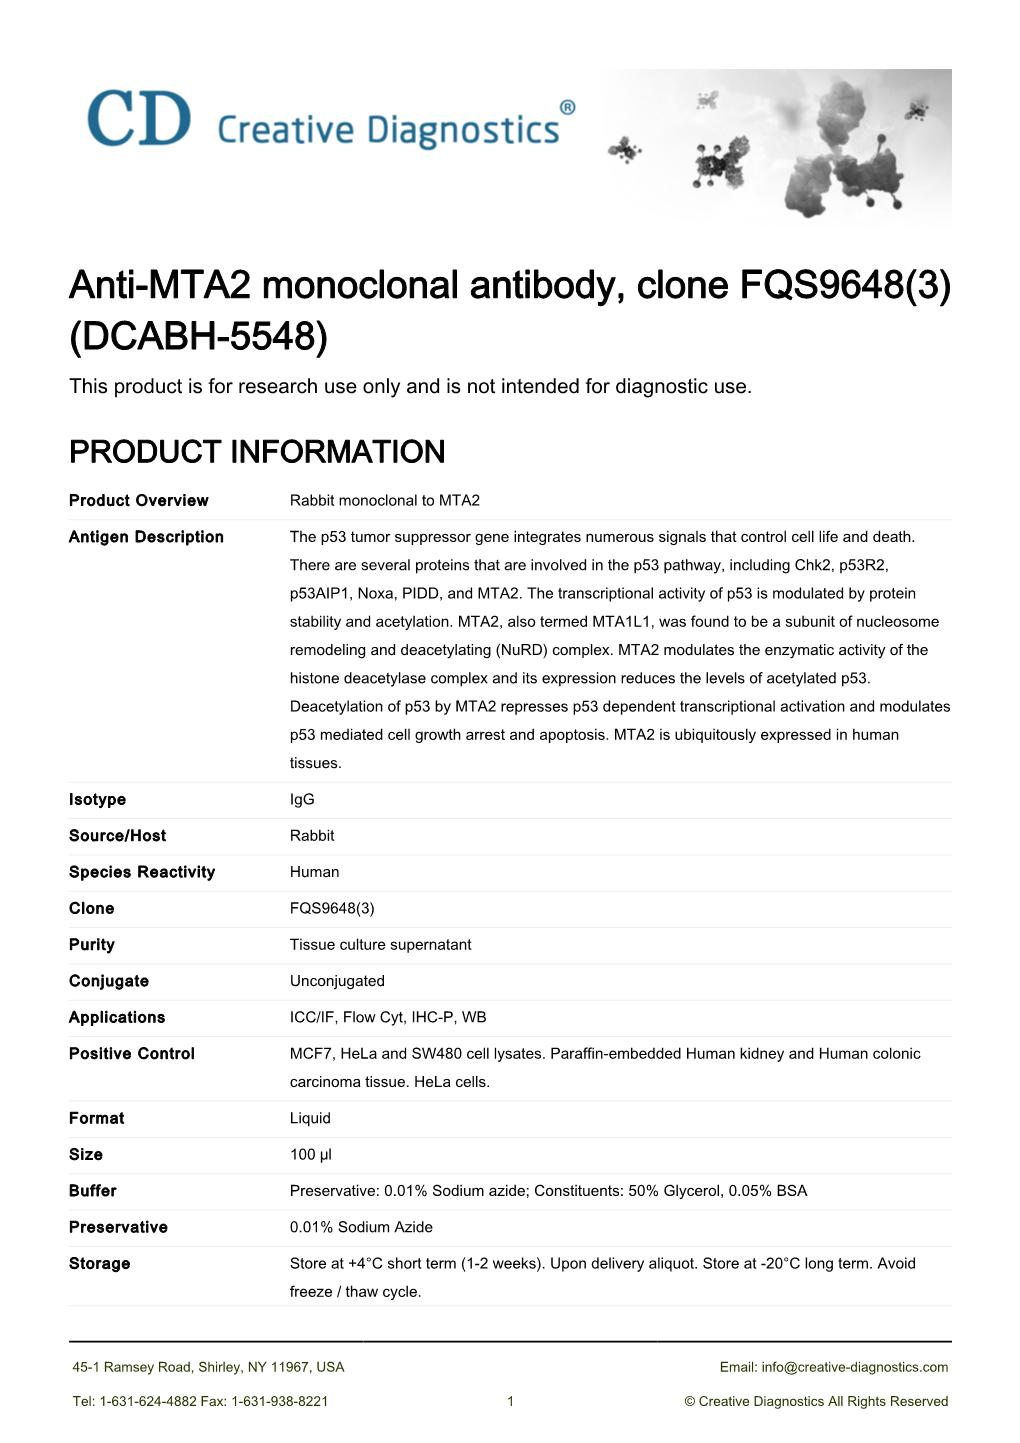 Anti-MTA2 Monoclonal Antibody, Clone FQS9648(3) (DCABH-5548) This Product Is for Research Use Only and Is Not Intended for Diagnostic Use